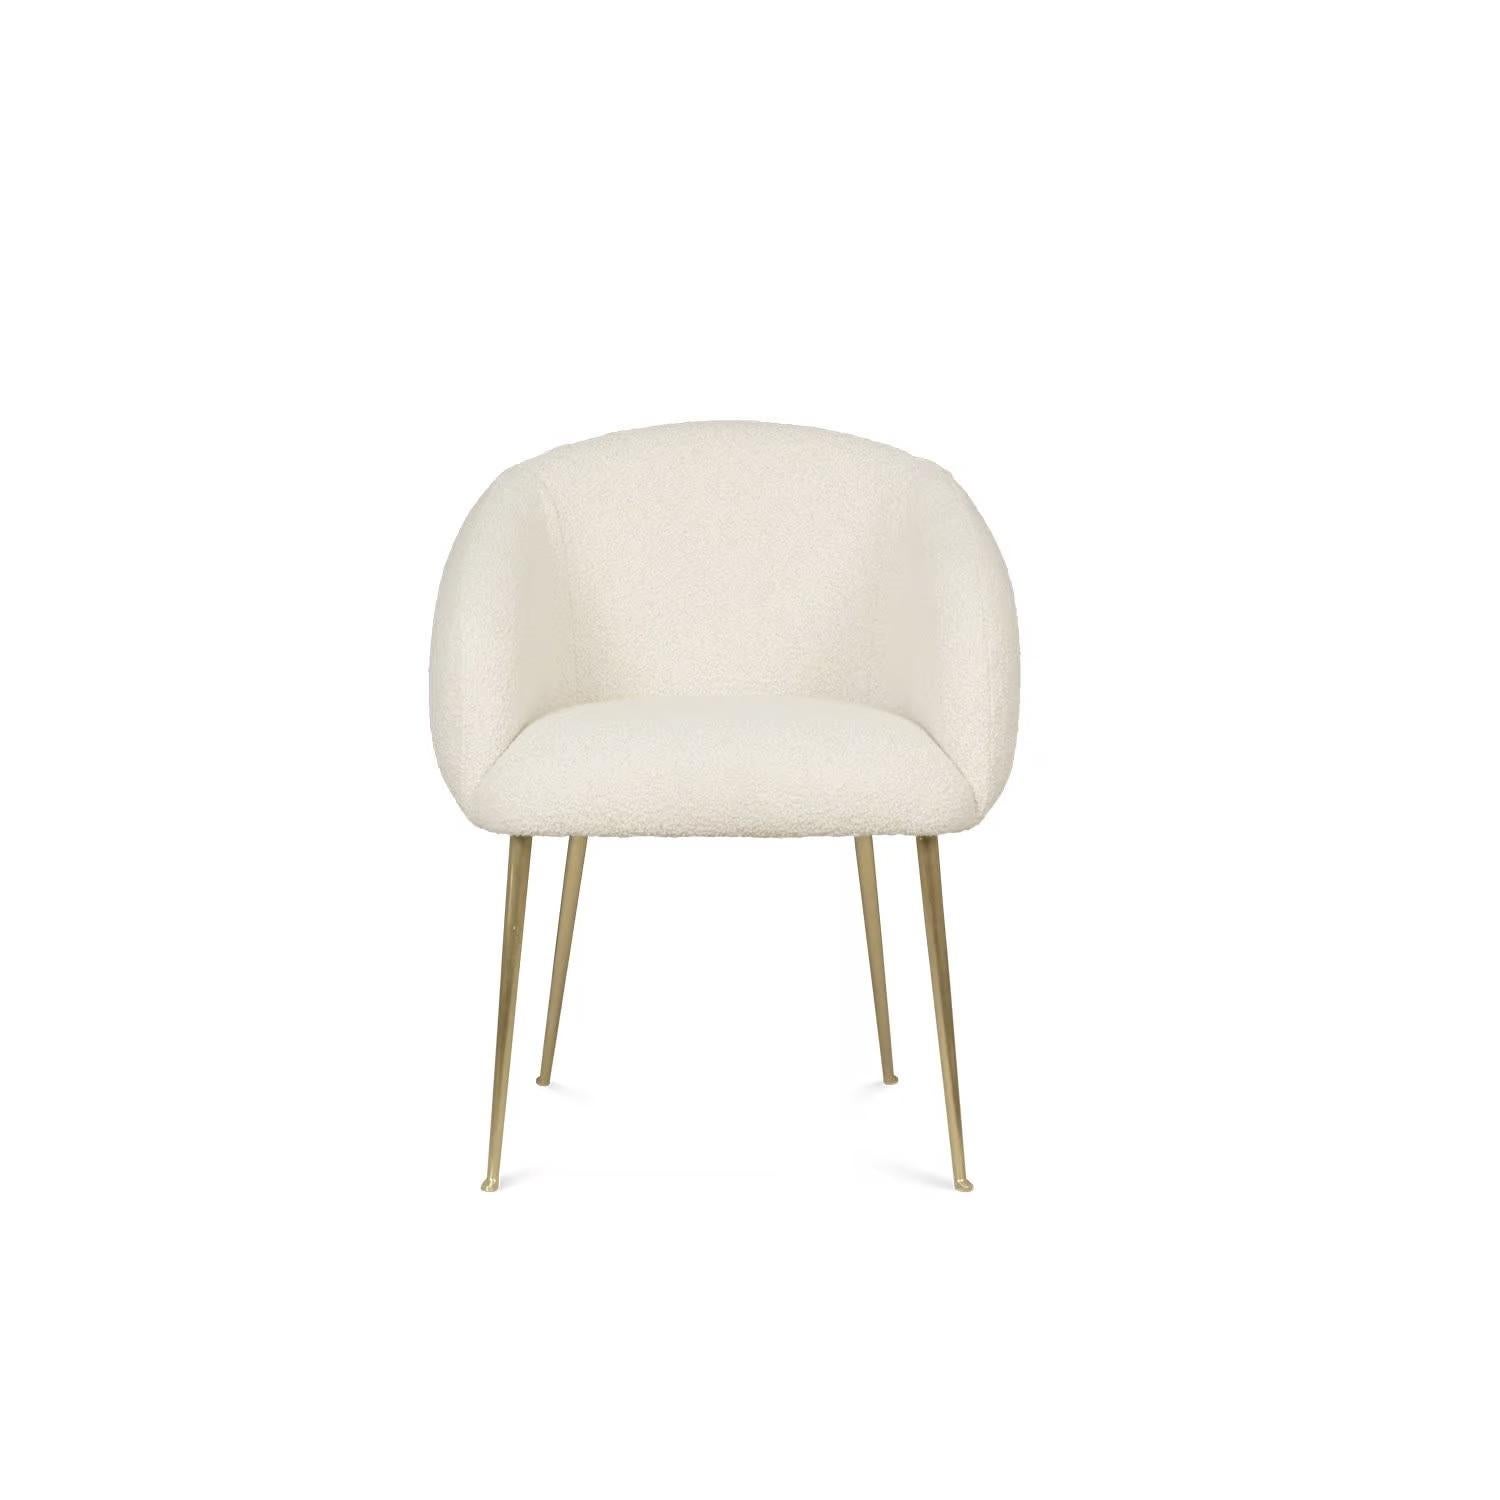 This chair is covered in boucle fabric, offering both comfort and style. Its sturdy brass legs provide a combination of strength and elegance to the overall design.
Dimensions: Width 24.4” x depth 17.75” x height 33.5” 
Custom sizes and materials